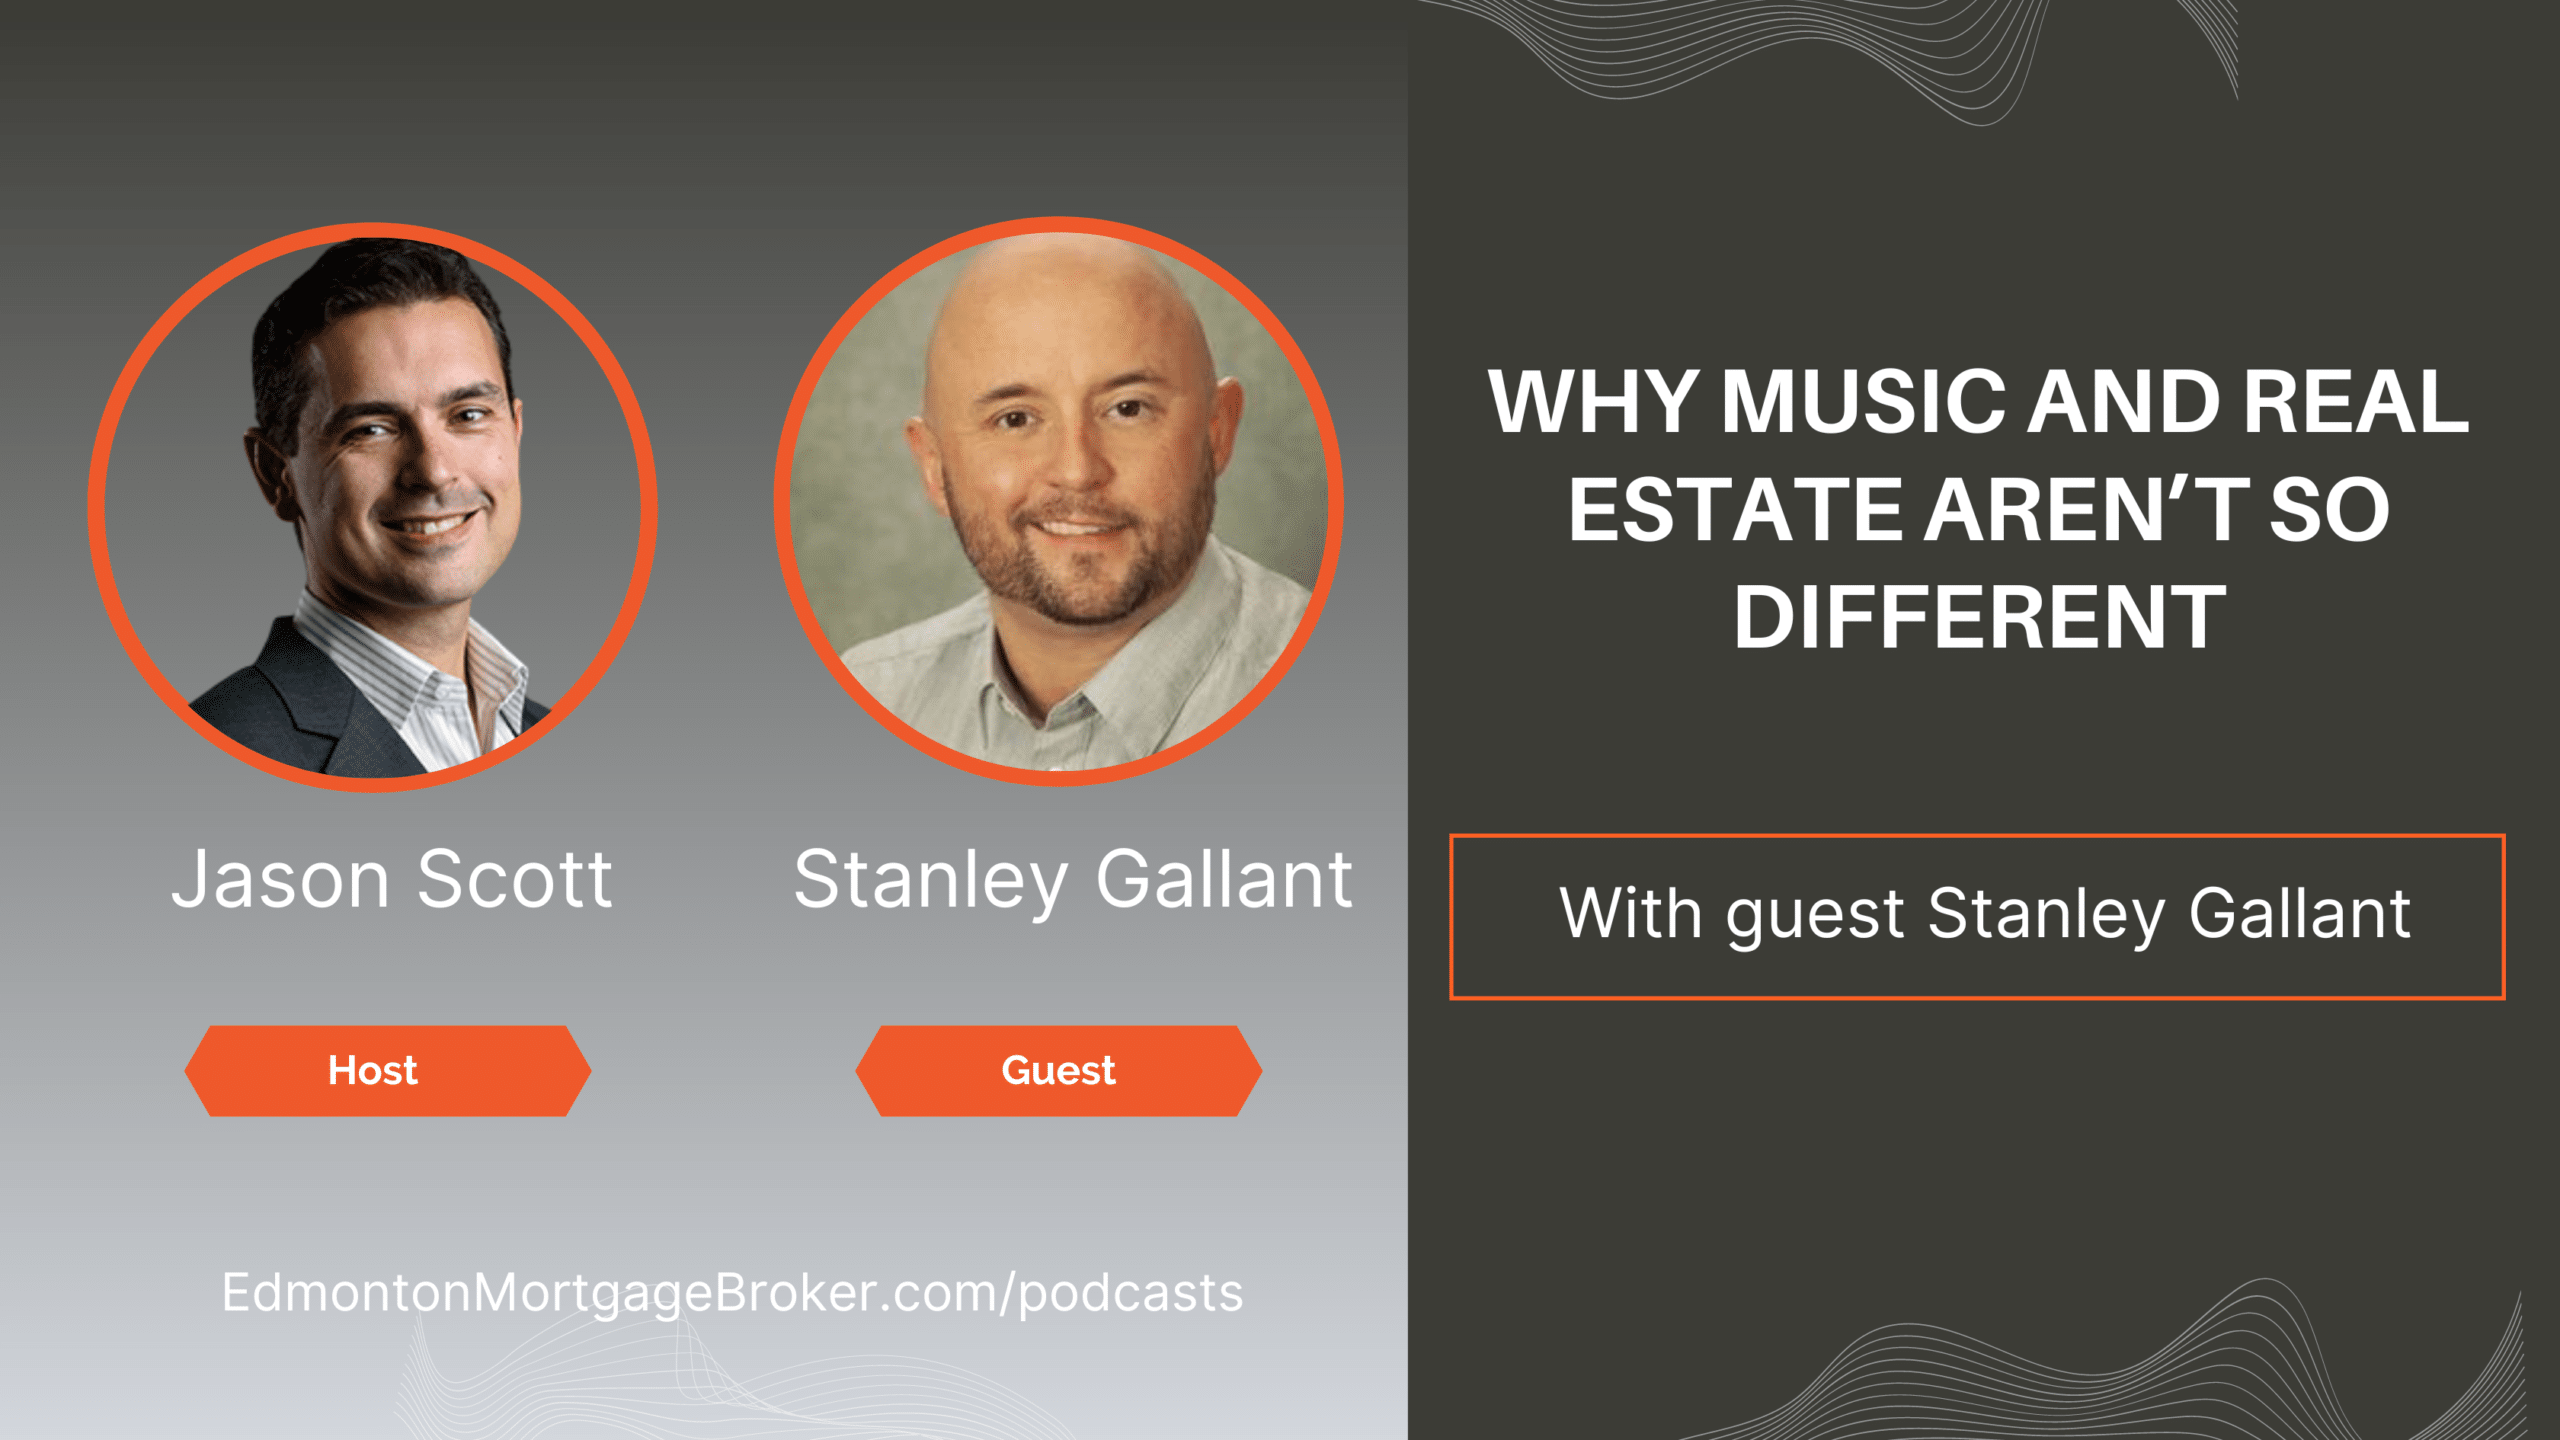 Jason Scott and Stanley Gallant explain the similarities between music and real estate on this podcast.